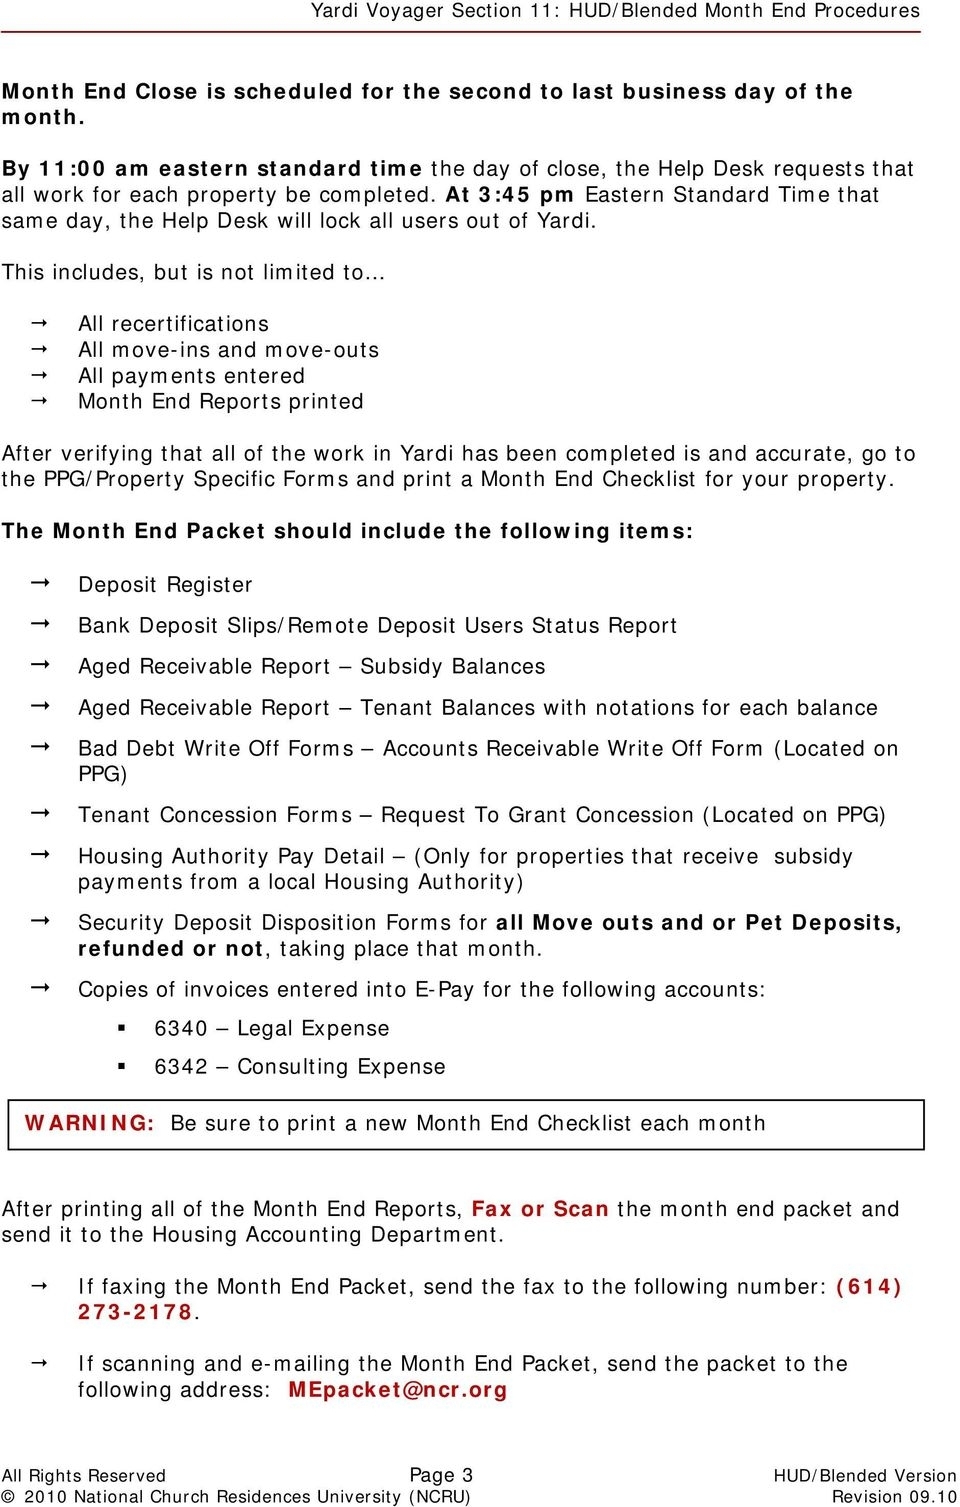 Section 11: Month End Procedures - Pdf And Month End Accounting Regarding Month End Report Template